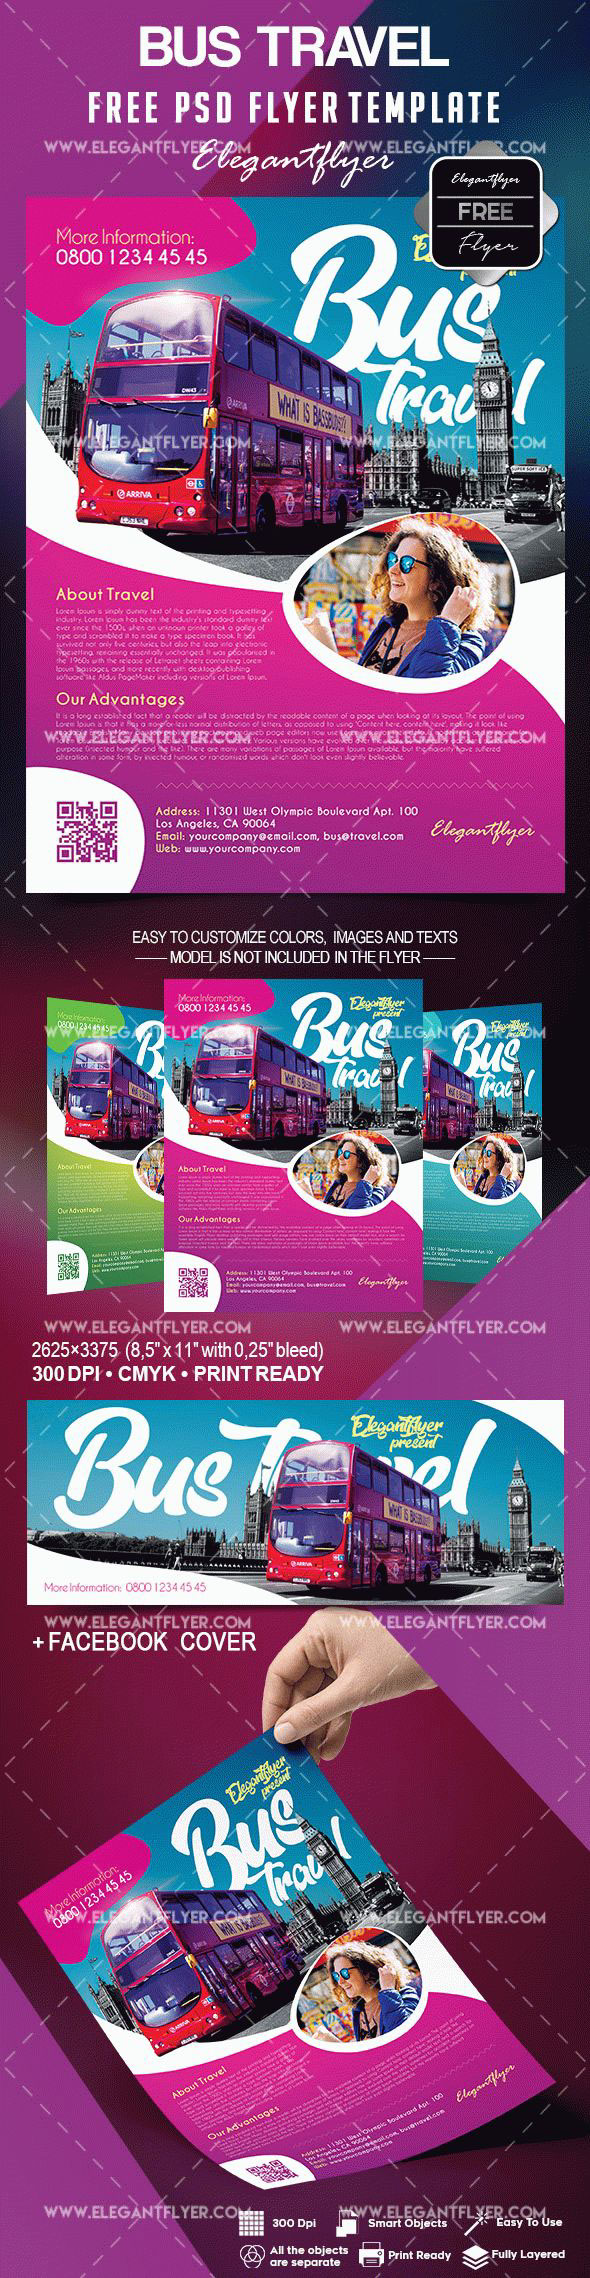 Free Bus Travel Flyer Template on Behance Regarding Bus Trip Flyer Templates Free